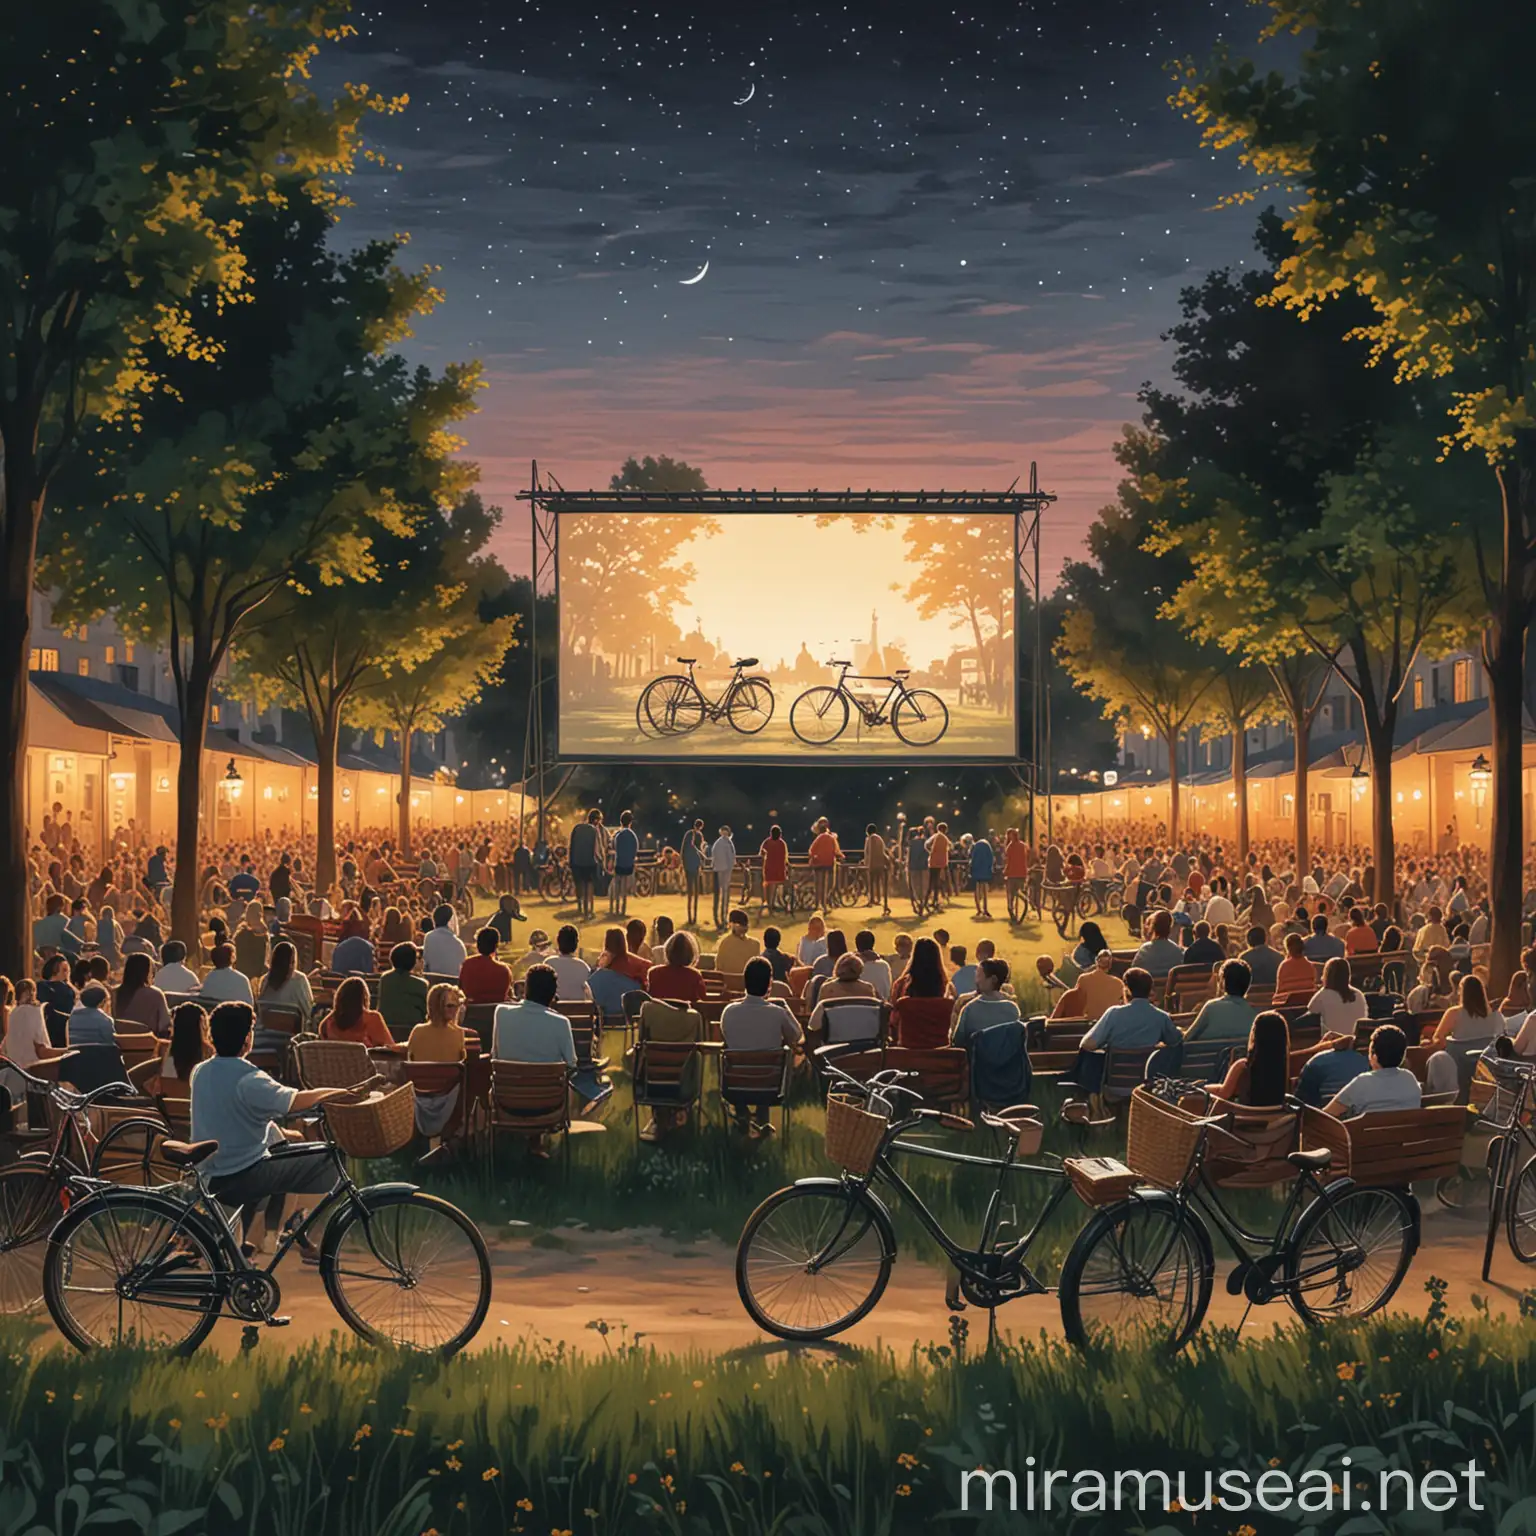 open air cinema with bicycles ıllustration